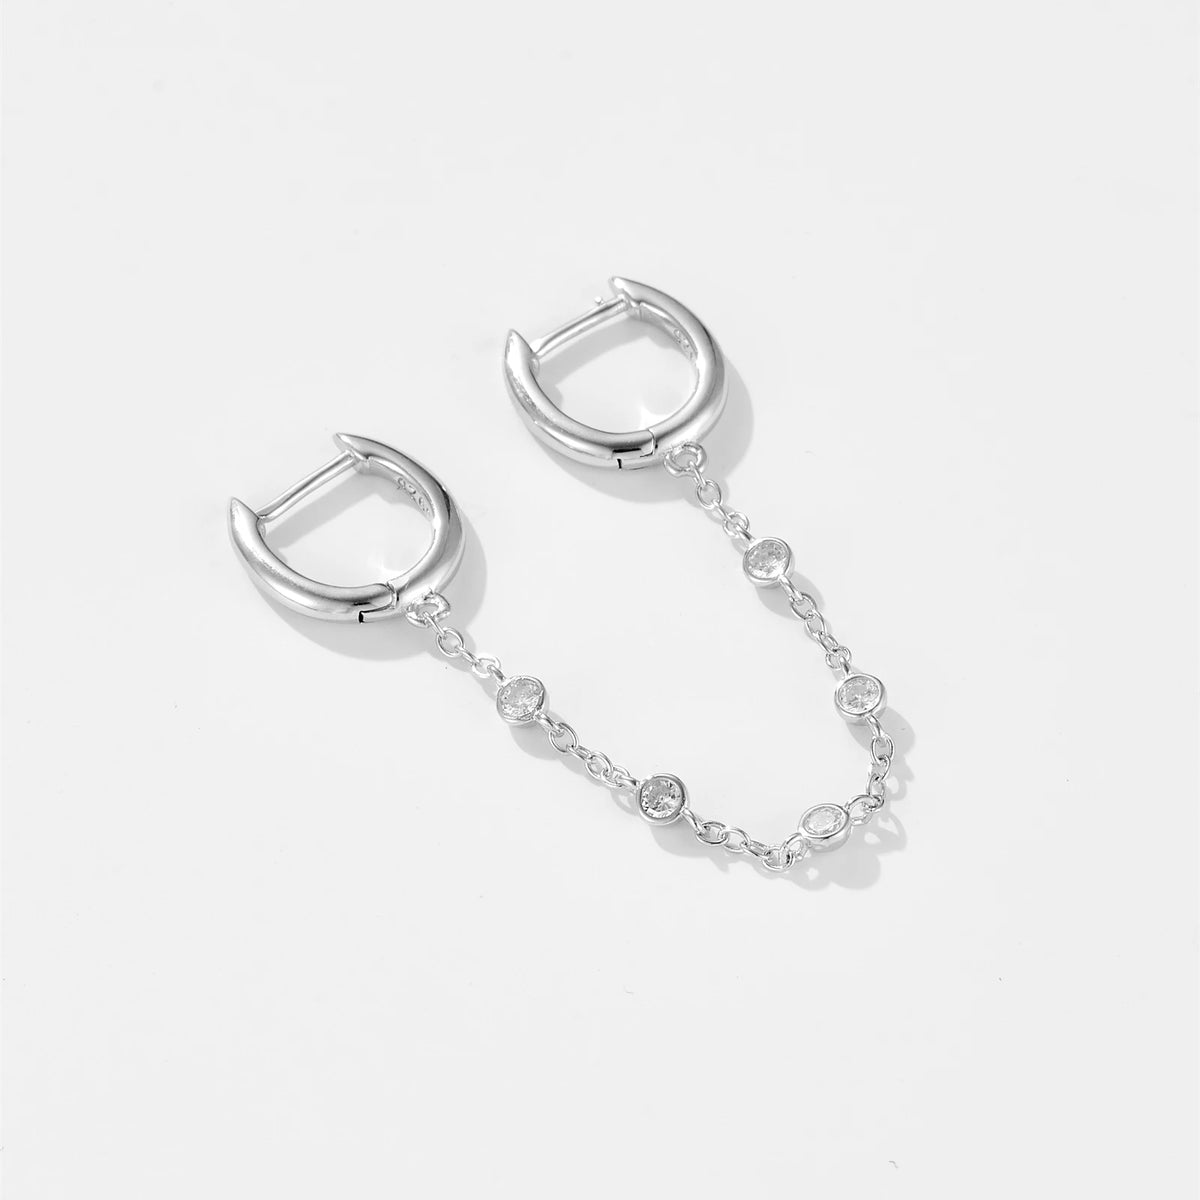 ANDYWEN 925 Sterling Silver Solid Safe Chain Double Huggies Crystal CZ